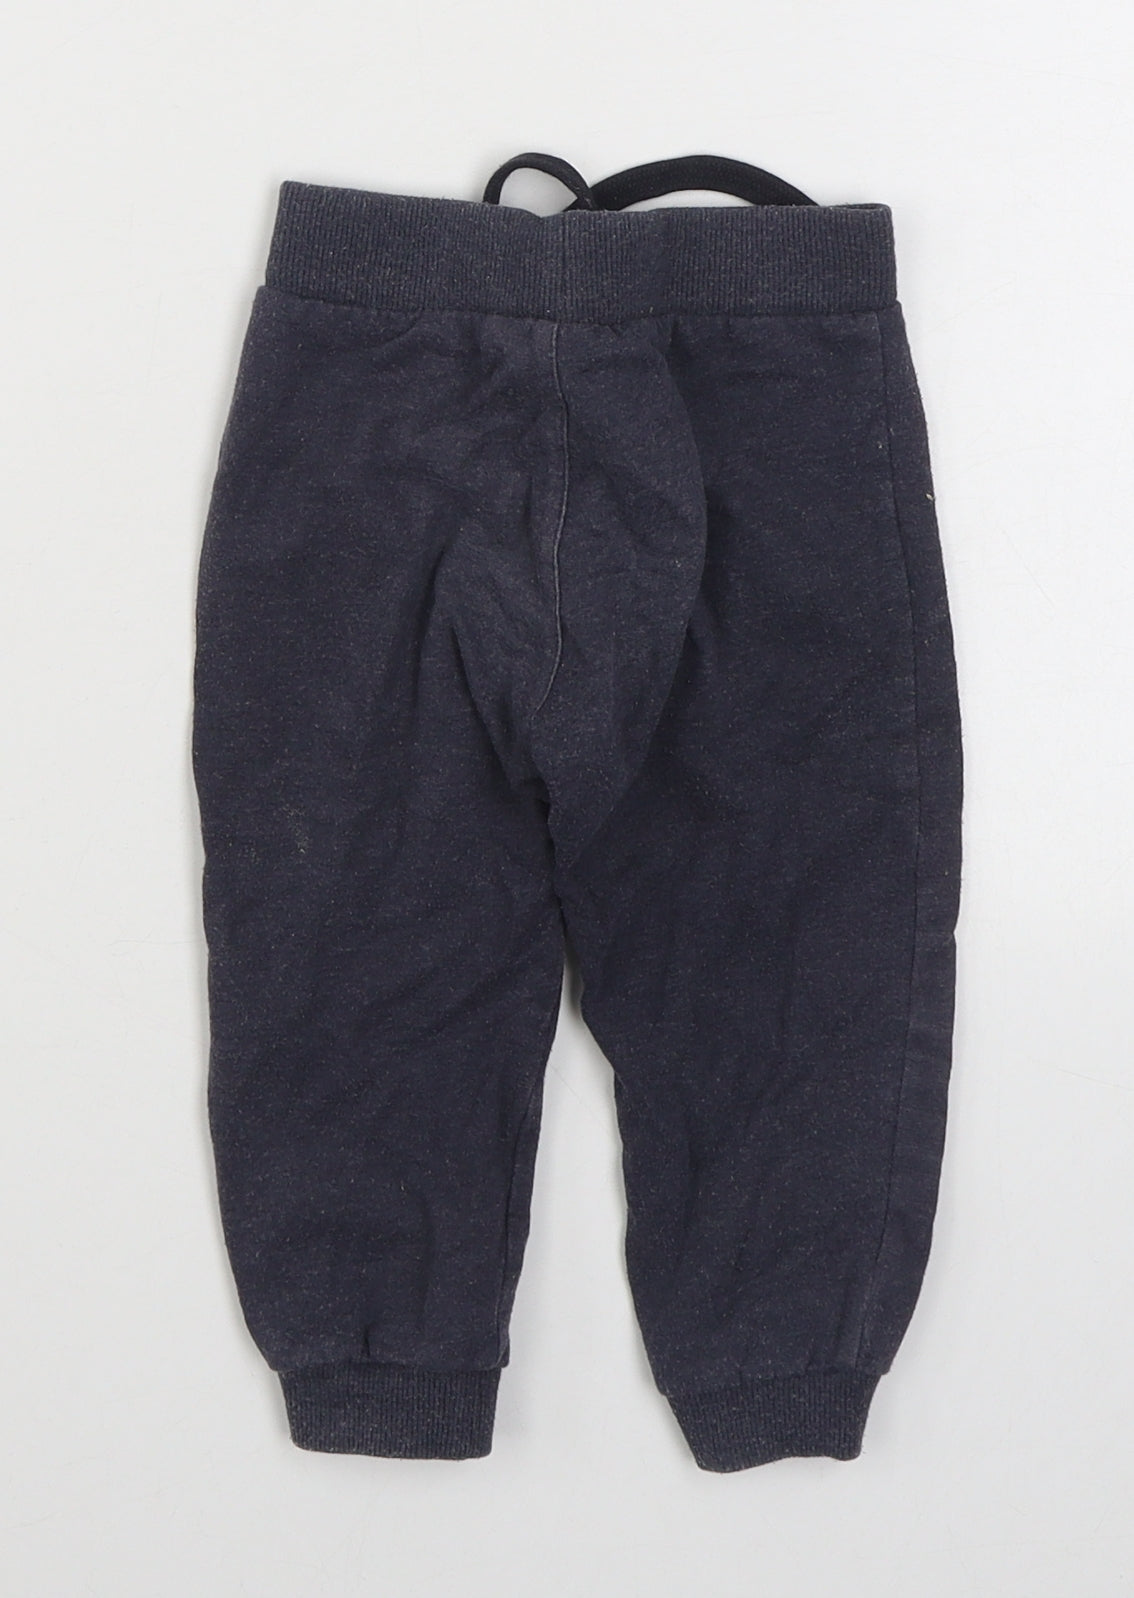 Cango Boys Blue  Cotton Jogger Trousers Size 2-3 Years  Regular Tie